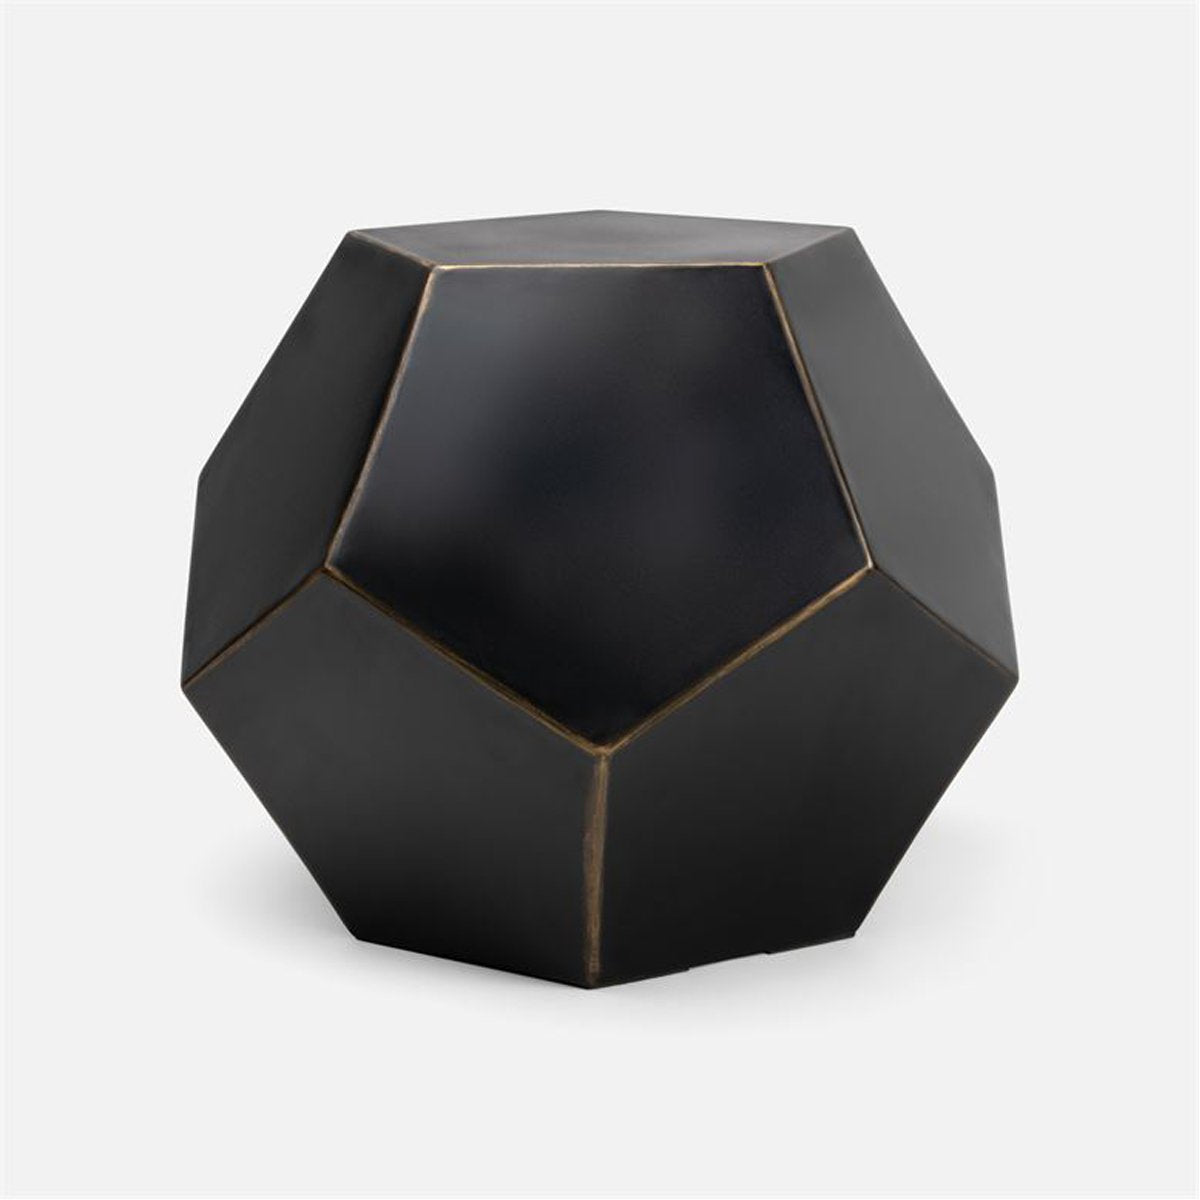 Made Goods Valenia Fiber Reinforced Concrete Dodecahedron Side Table